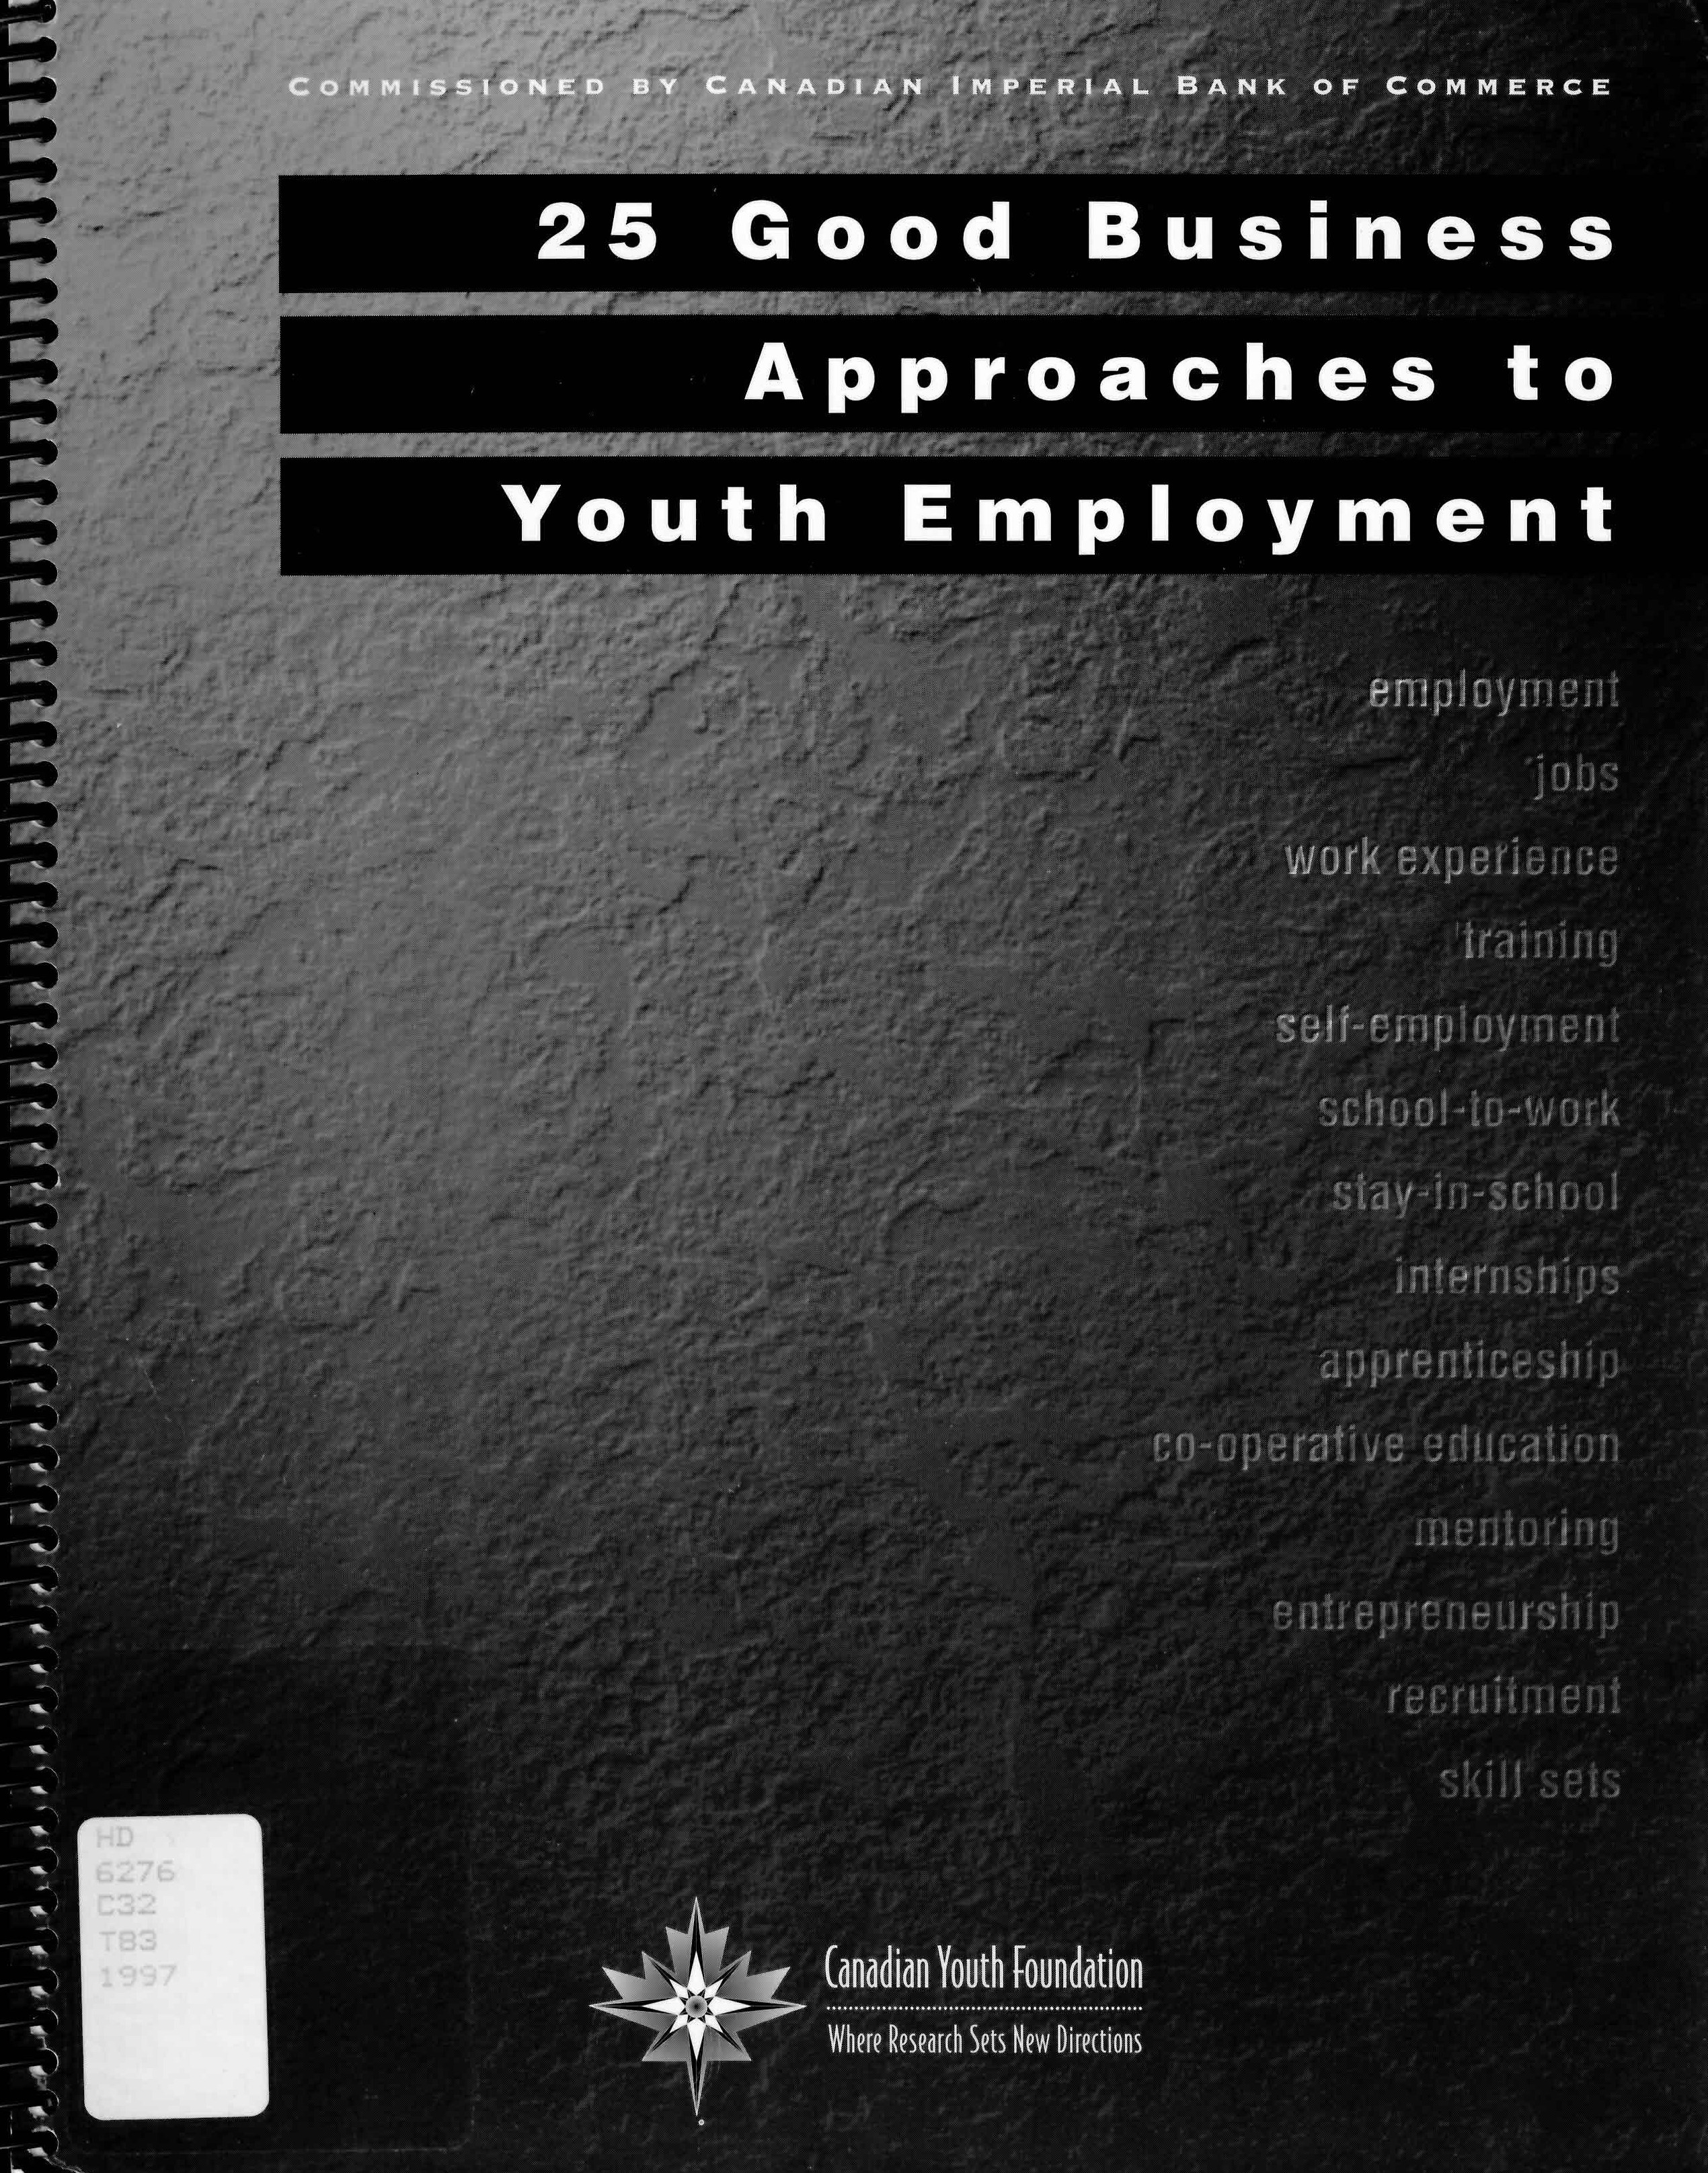 25 good business approaches to youth employment: : employment, jobs, work experience, training, self-employment, school-to-work, stay-in-school, internships, apprenticeship, co-operative education, mentoring, entrepreneurship, recruitment, skill sets